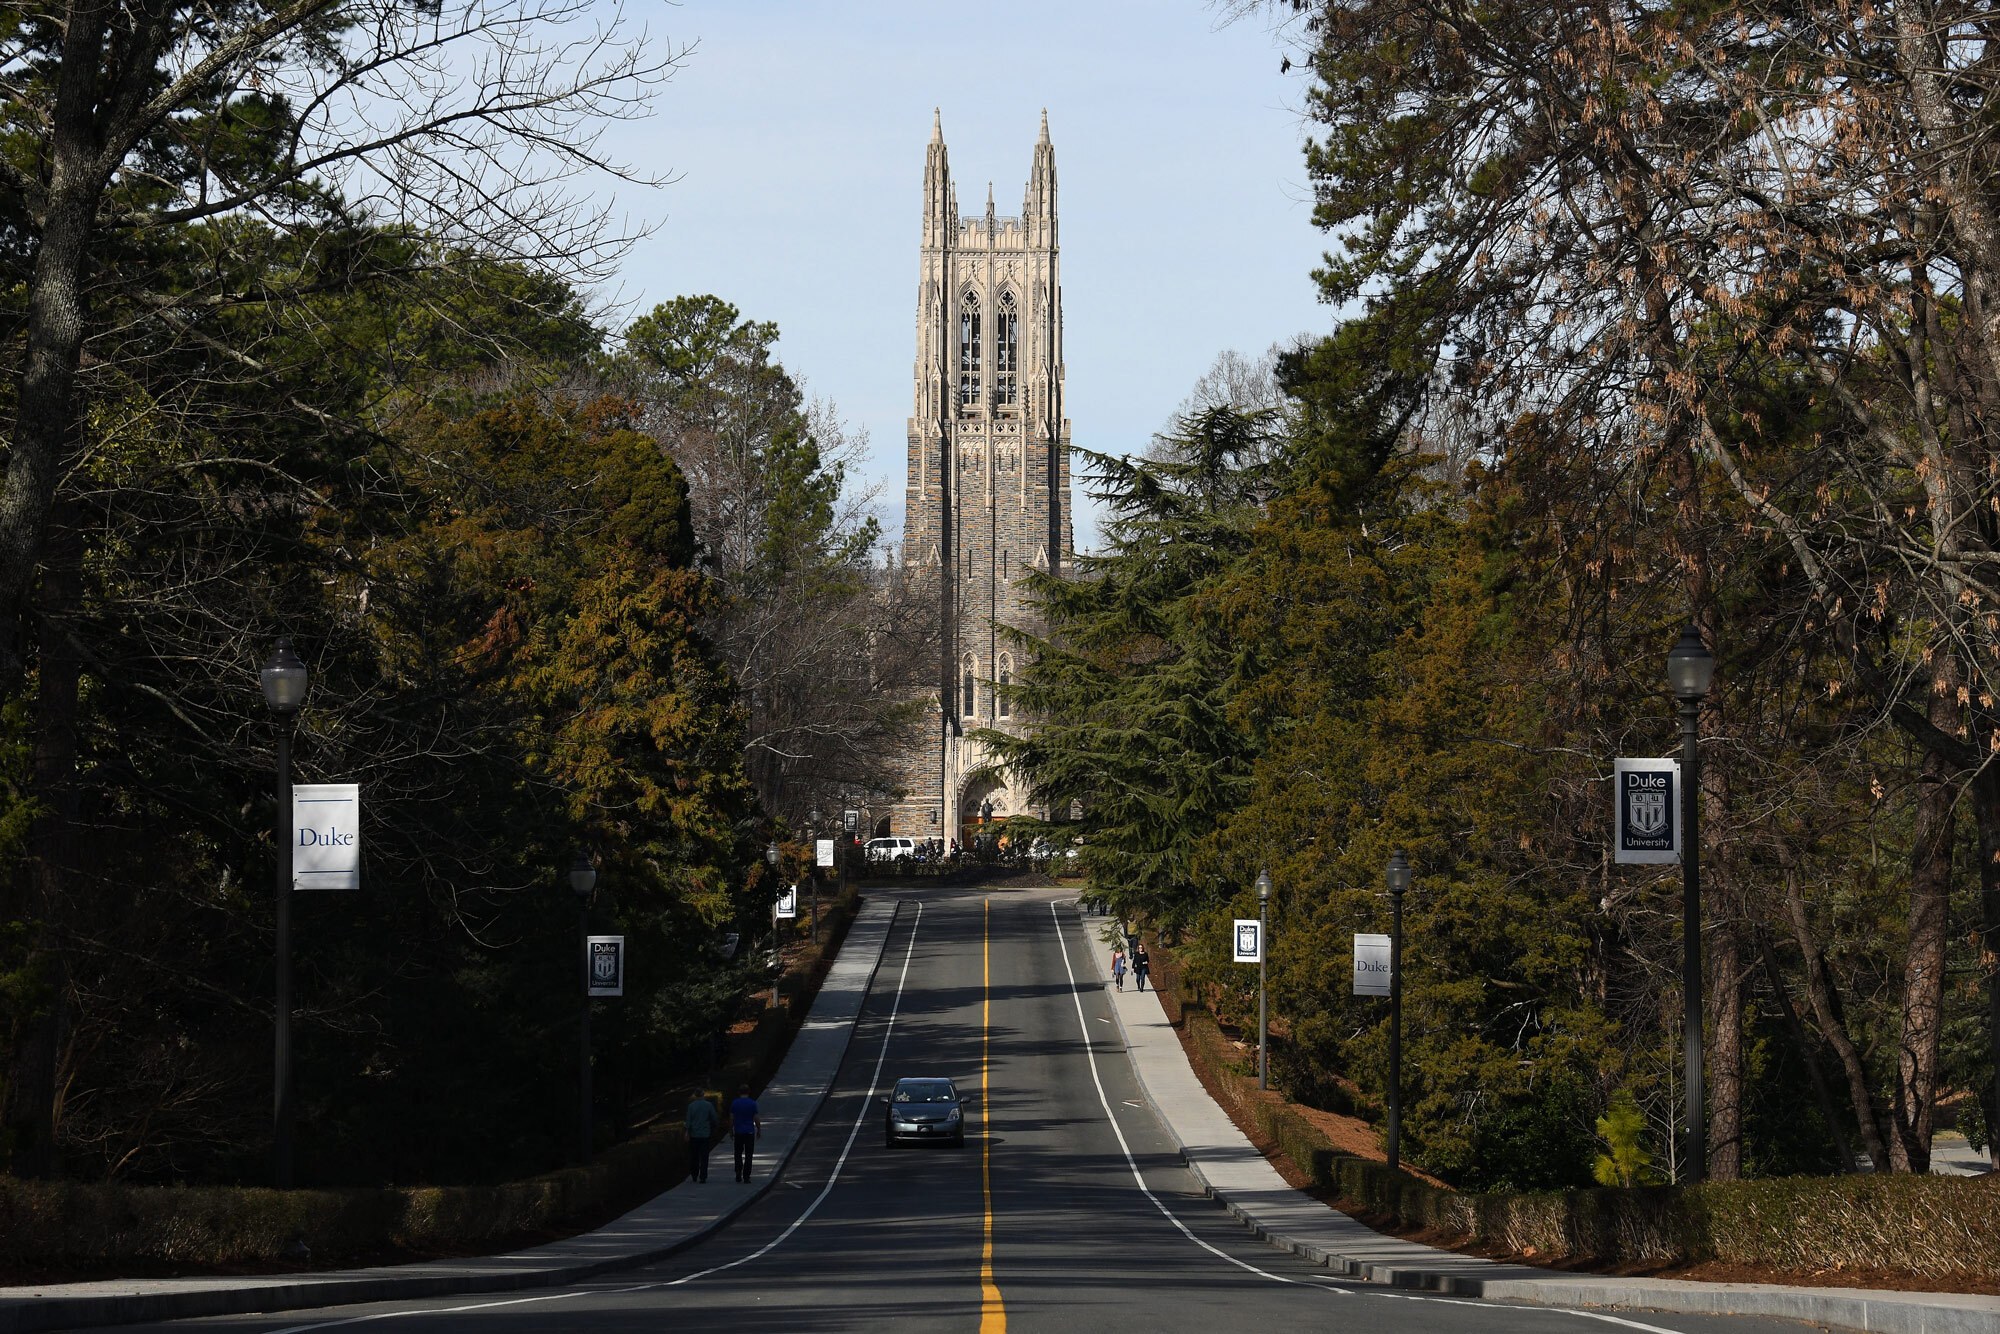 A general view of the Duke University Chapel on the campus of Duke University, in Durham, North Carolina, in 2018.